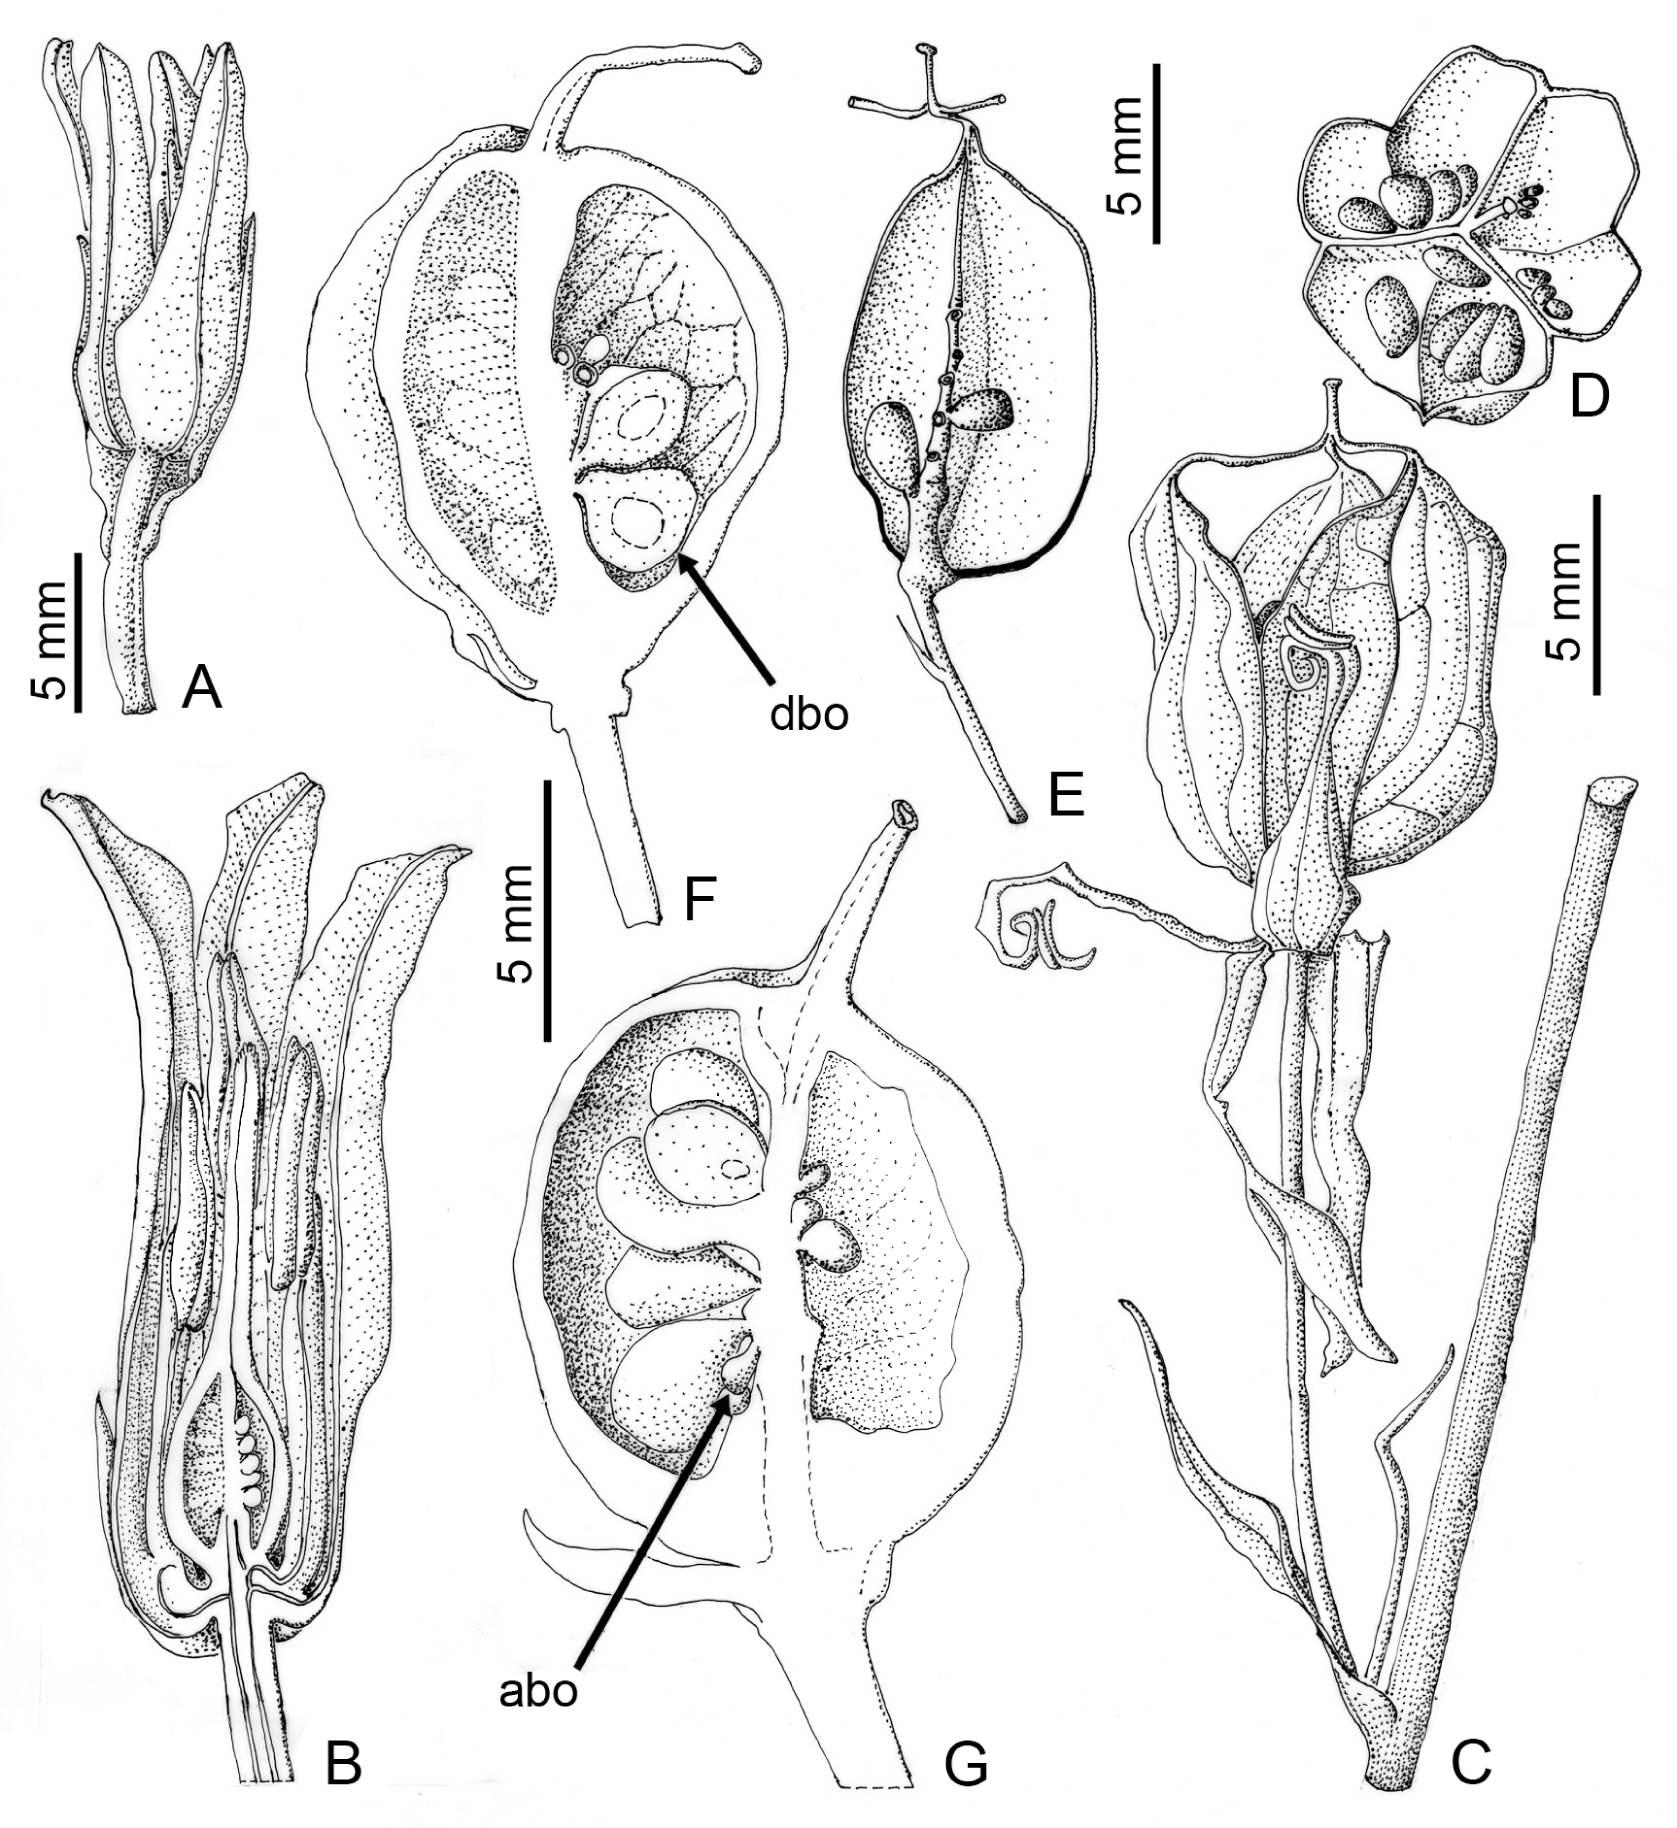 Fig. 6. Hyacinthoides non-scripta: A – side view of the anatomized flower; B – longitudinal section of an anthetical flower; C-D – mature fruit, in side and top views; E – detail of the fruiting axile placenta, with basal congenitally fused fruit walls in black; F-G – longitudinally cut two young fruits, showing basal ovule developing (dbo) or aborted (abo).